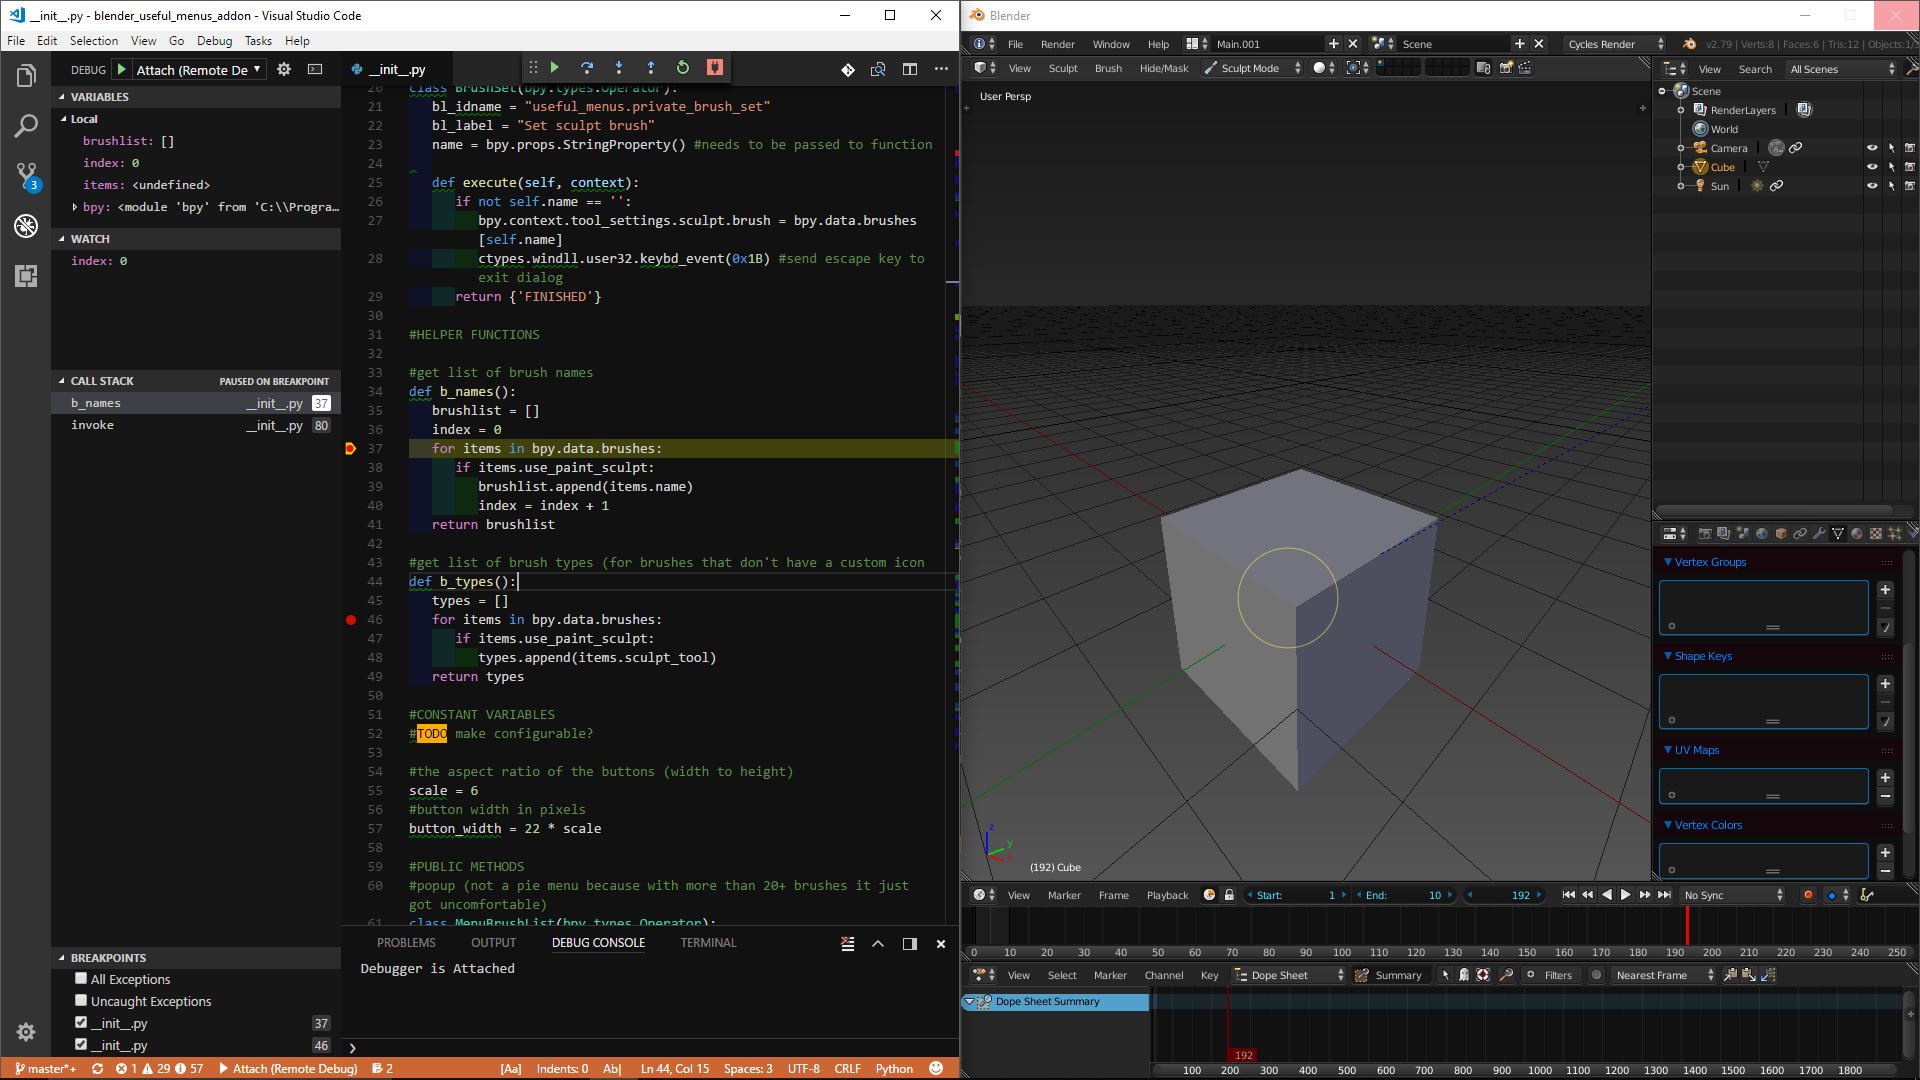 Image Showing VS Code side by side with Blender paused at a breakpoint. In the console, a "Debugger is Attached" Statement is printed.